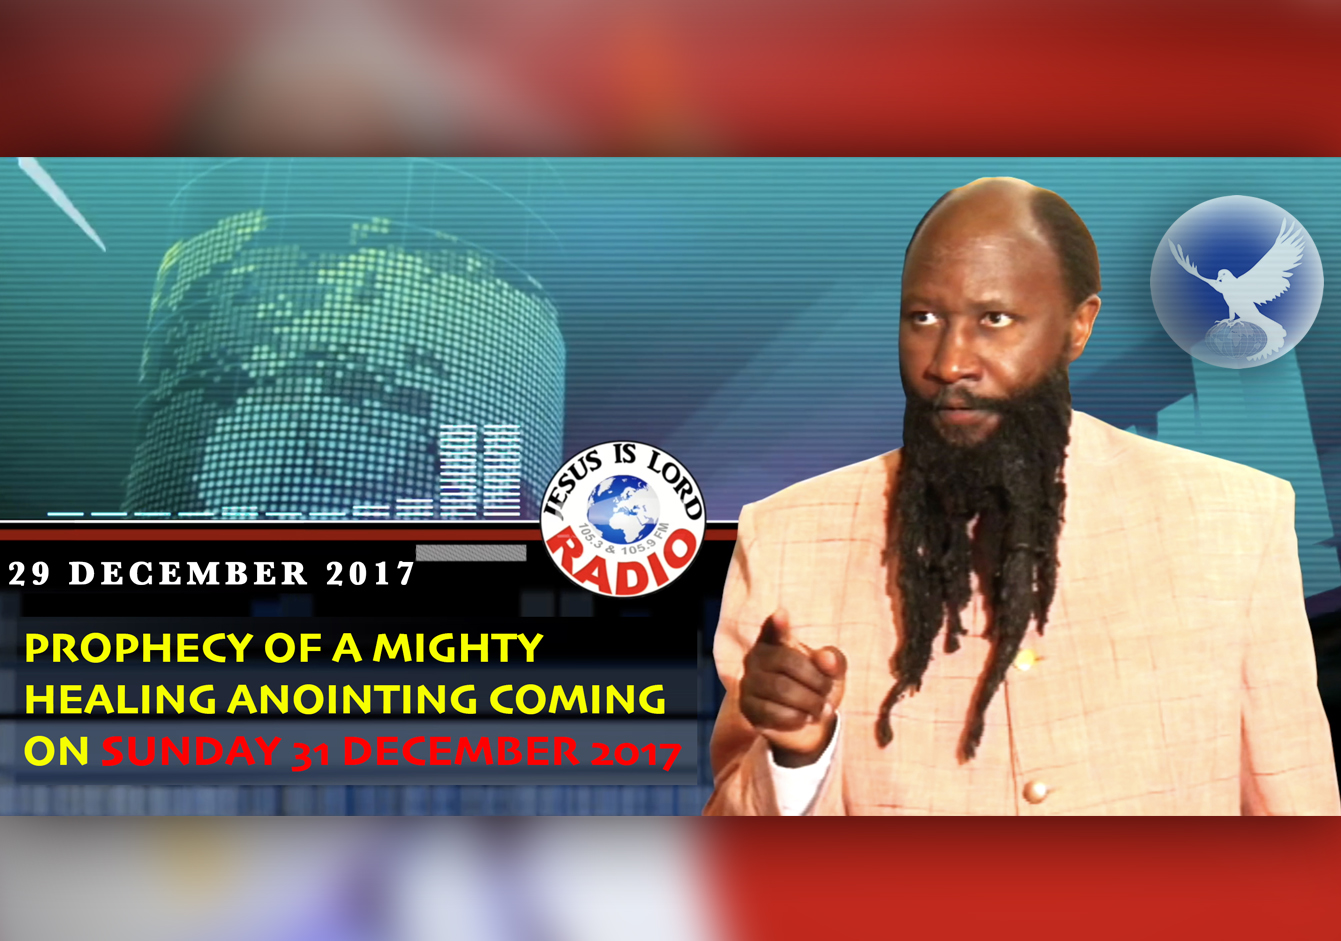 EPISODE 82 - PROPHECY OF MIGHTY GLOBAL HEALING ANOINTING COMING ON SUNDAY 31 DECEMBER 2017 (29DEC2017) - PROPHET DR. OWUOR